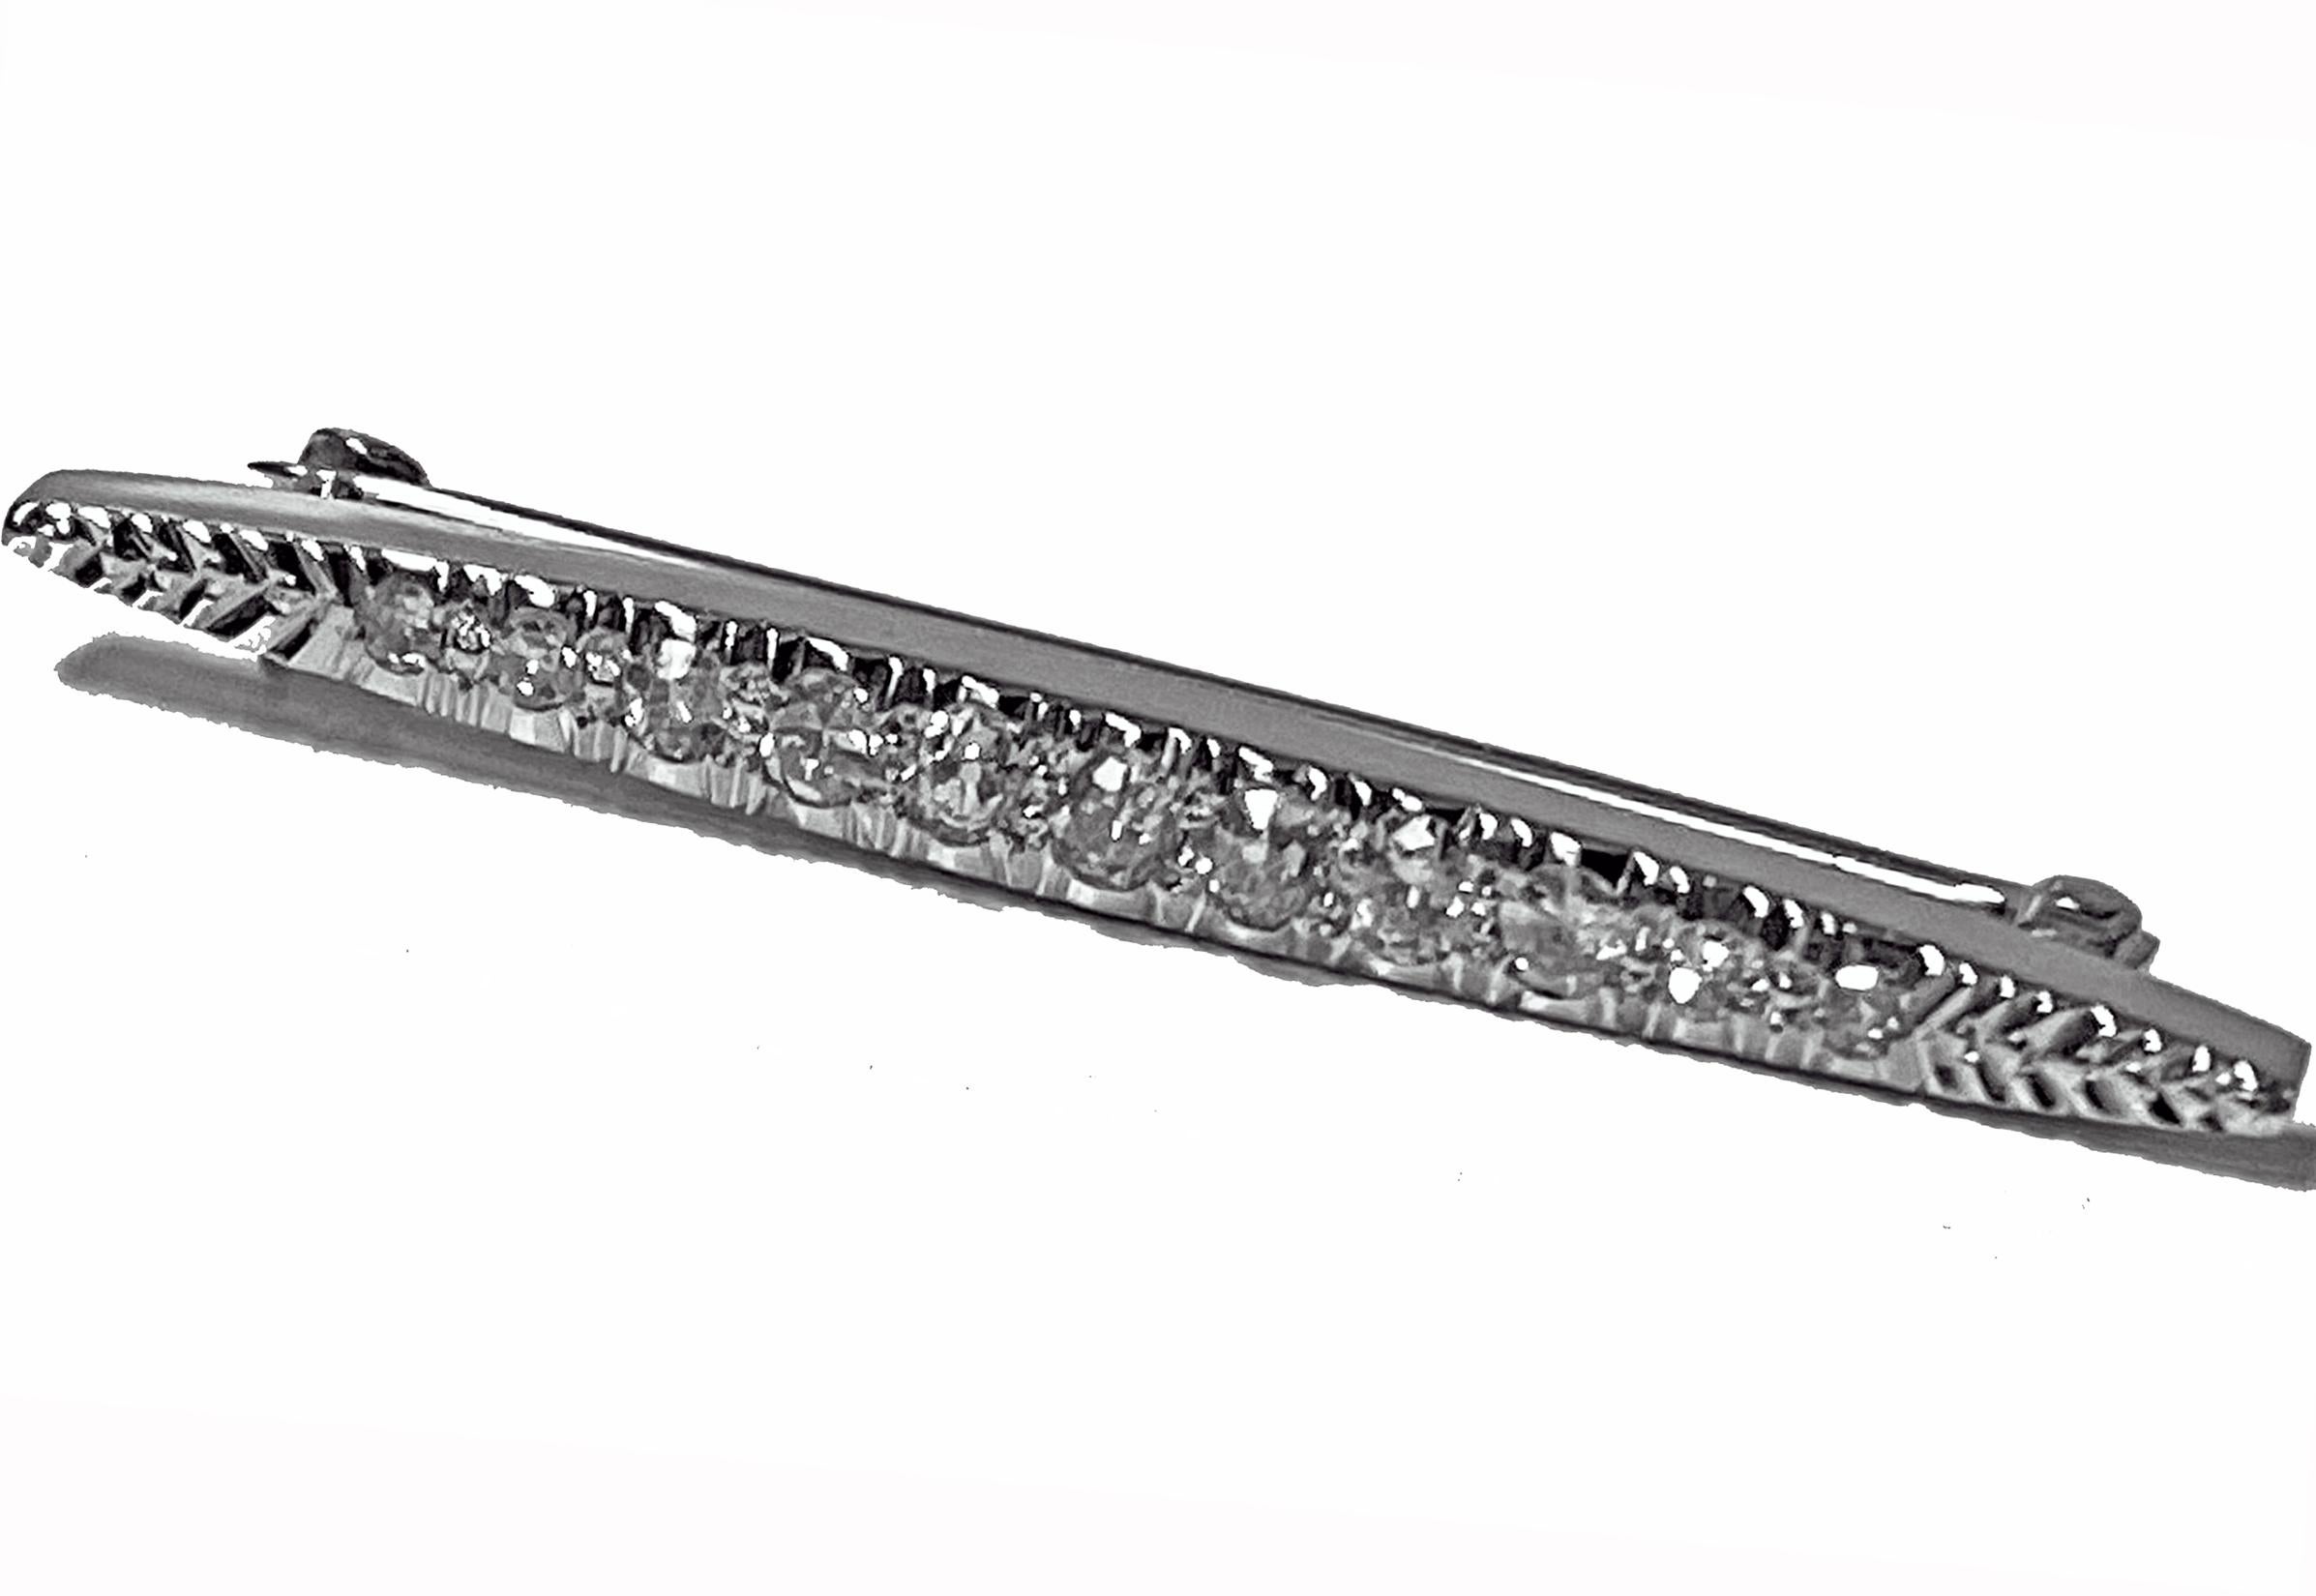 Art Deco Diamond 14K white gold Brooch, C.1920. The elongated tapered brooch set with 11 mixed old cut diamonds, total diamond weight approximately 0.12 ct, average SI clarity, average I colour. Bar pin with safety catch. Length: 37.00mm. Maximum